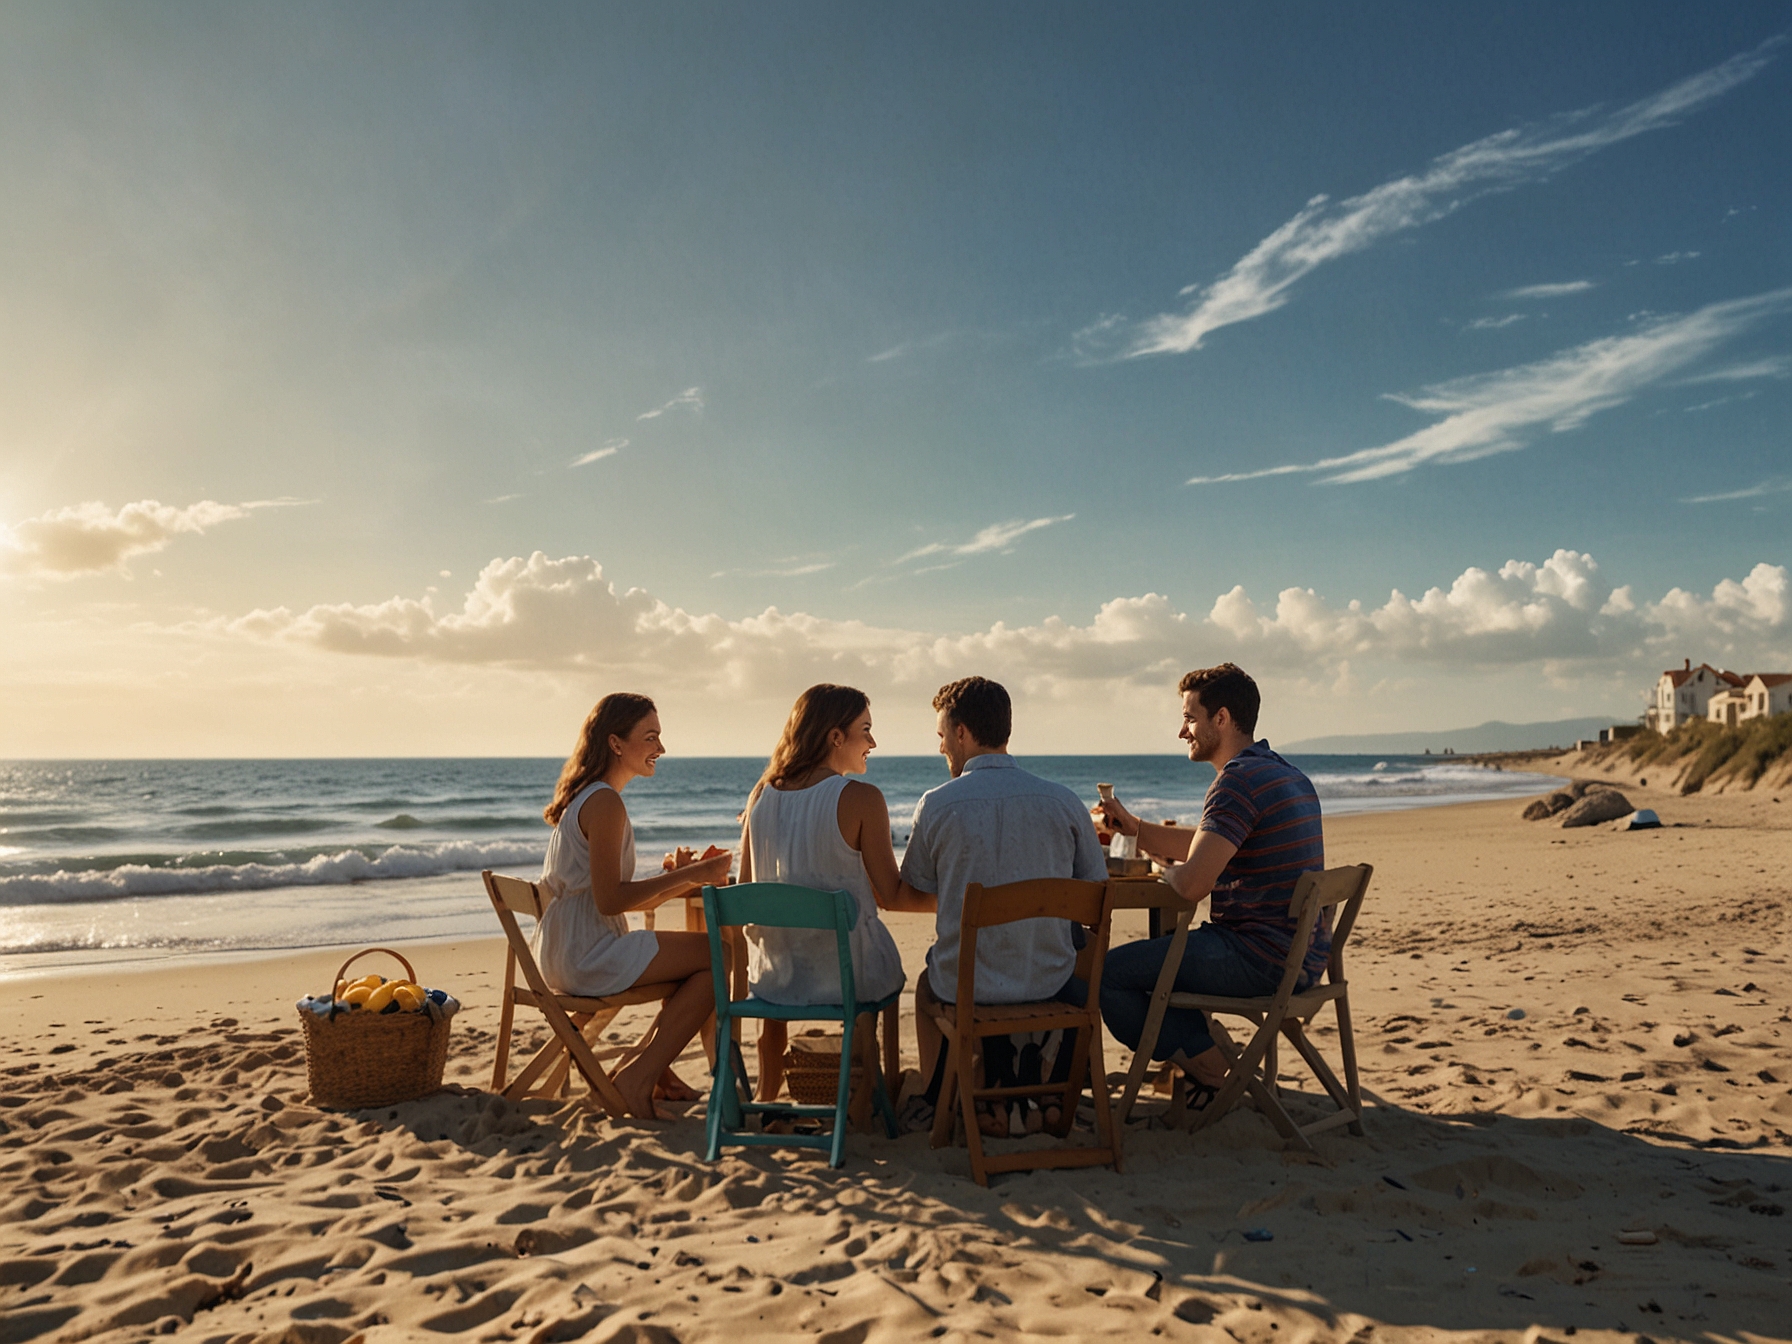 A group of friends sharing a meal on the beach under clear blue skies, with picnic baskets, snacks, and a backdrop of the ocean, illustrating the spirit of community and relaxation.